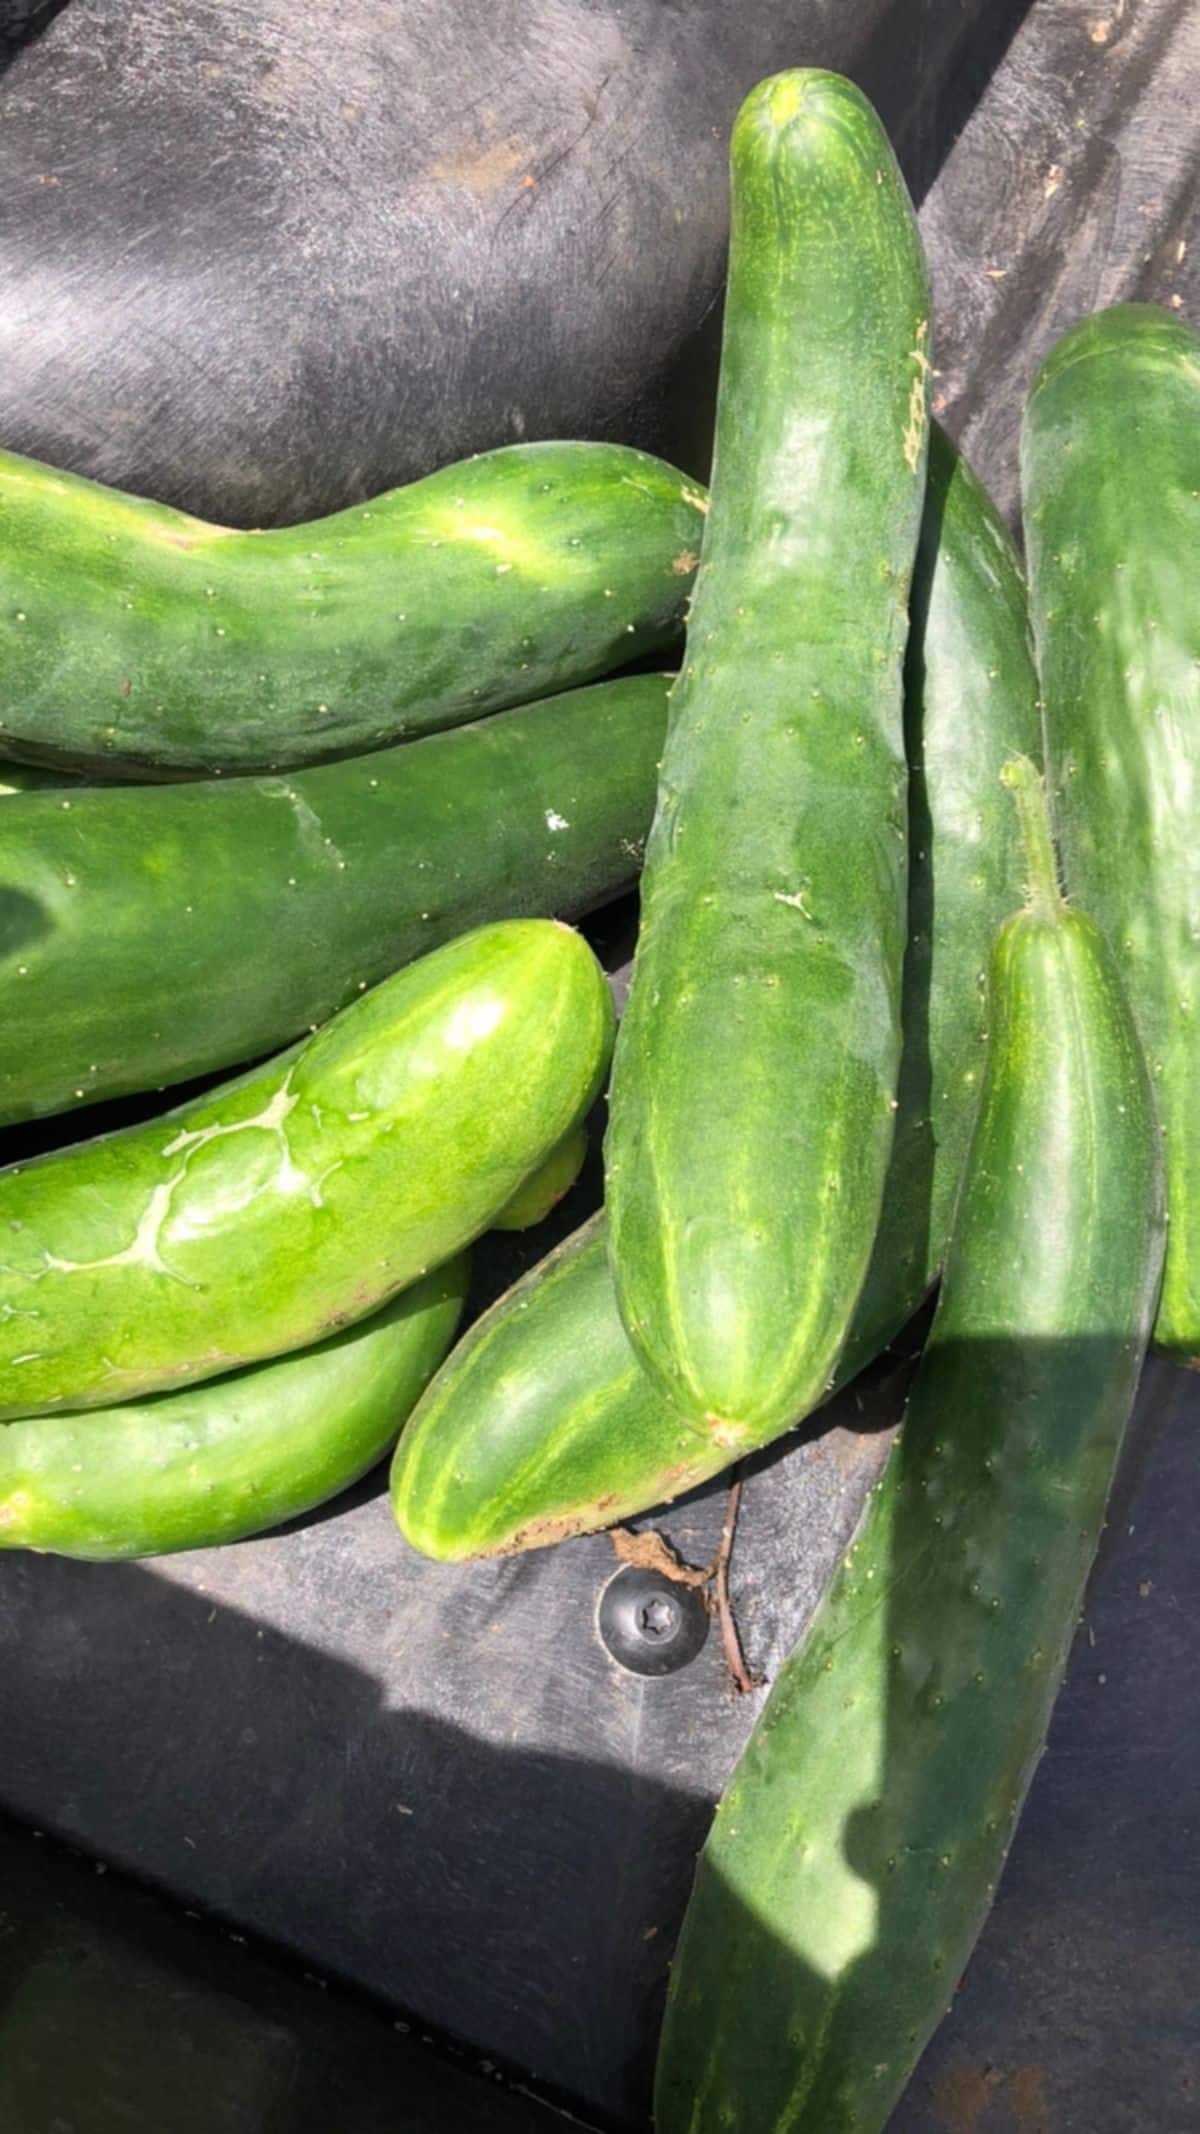 Extra cucumbers to be bartered.